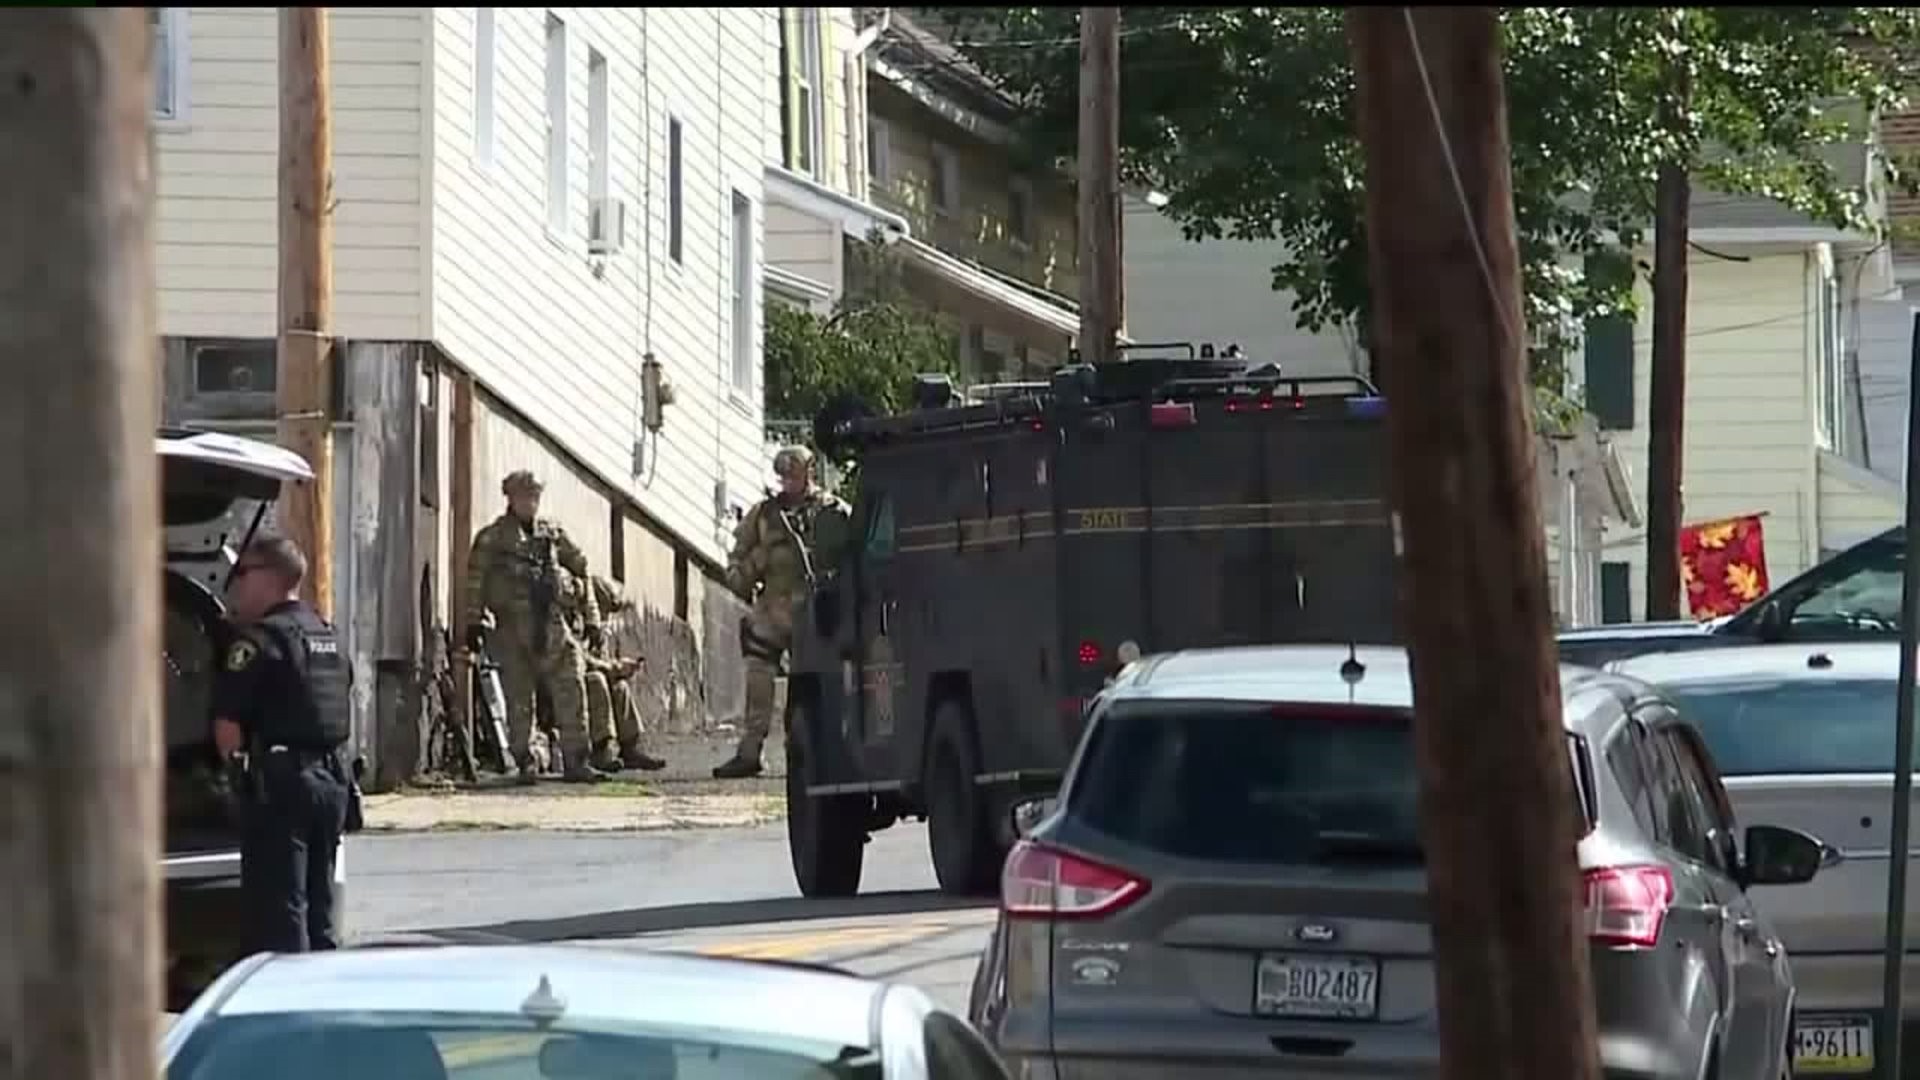 UPDATE: Homicide Suspect in Custody after Standoff in Wilkes-Barre Township